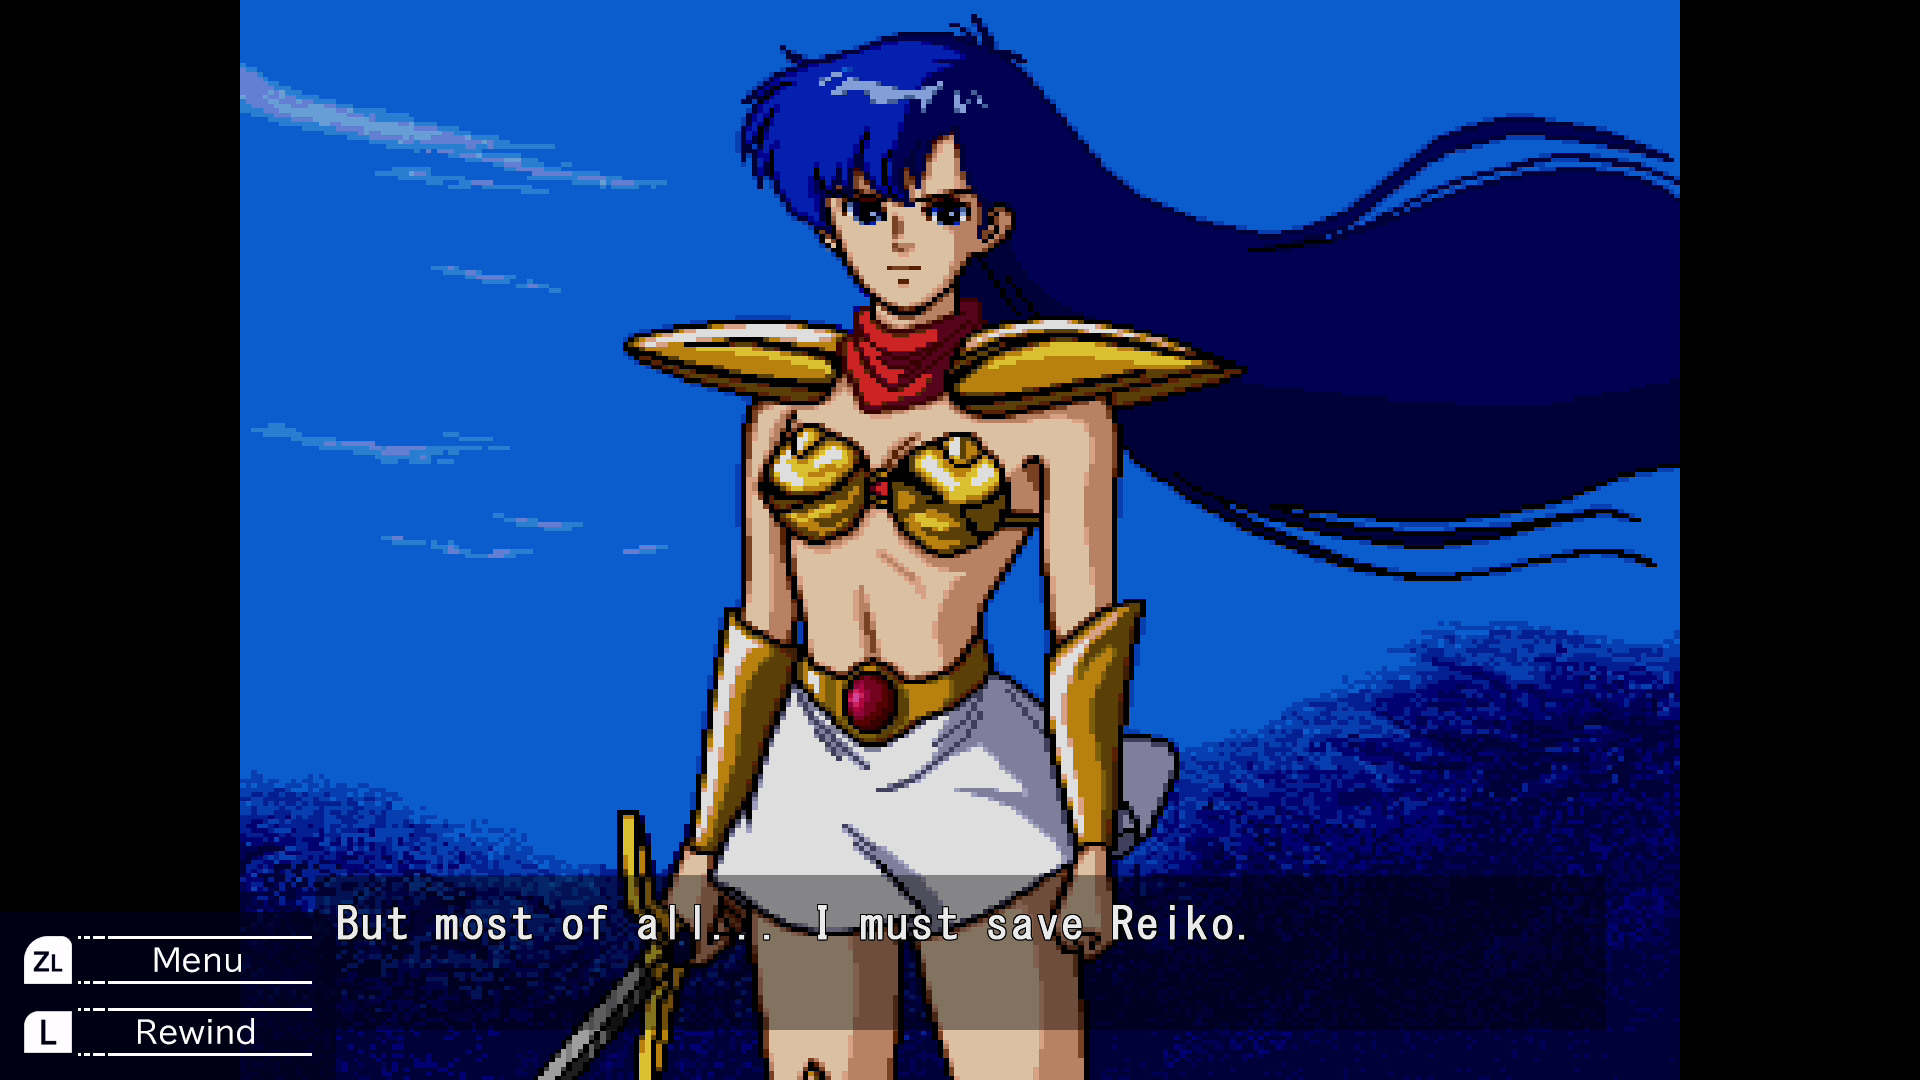 A screenshot from one of the Valis games showing a cut scene